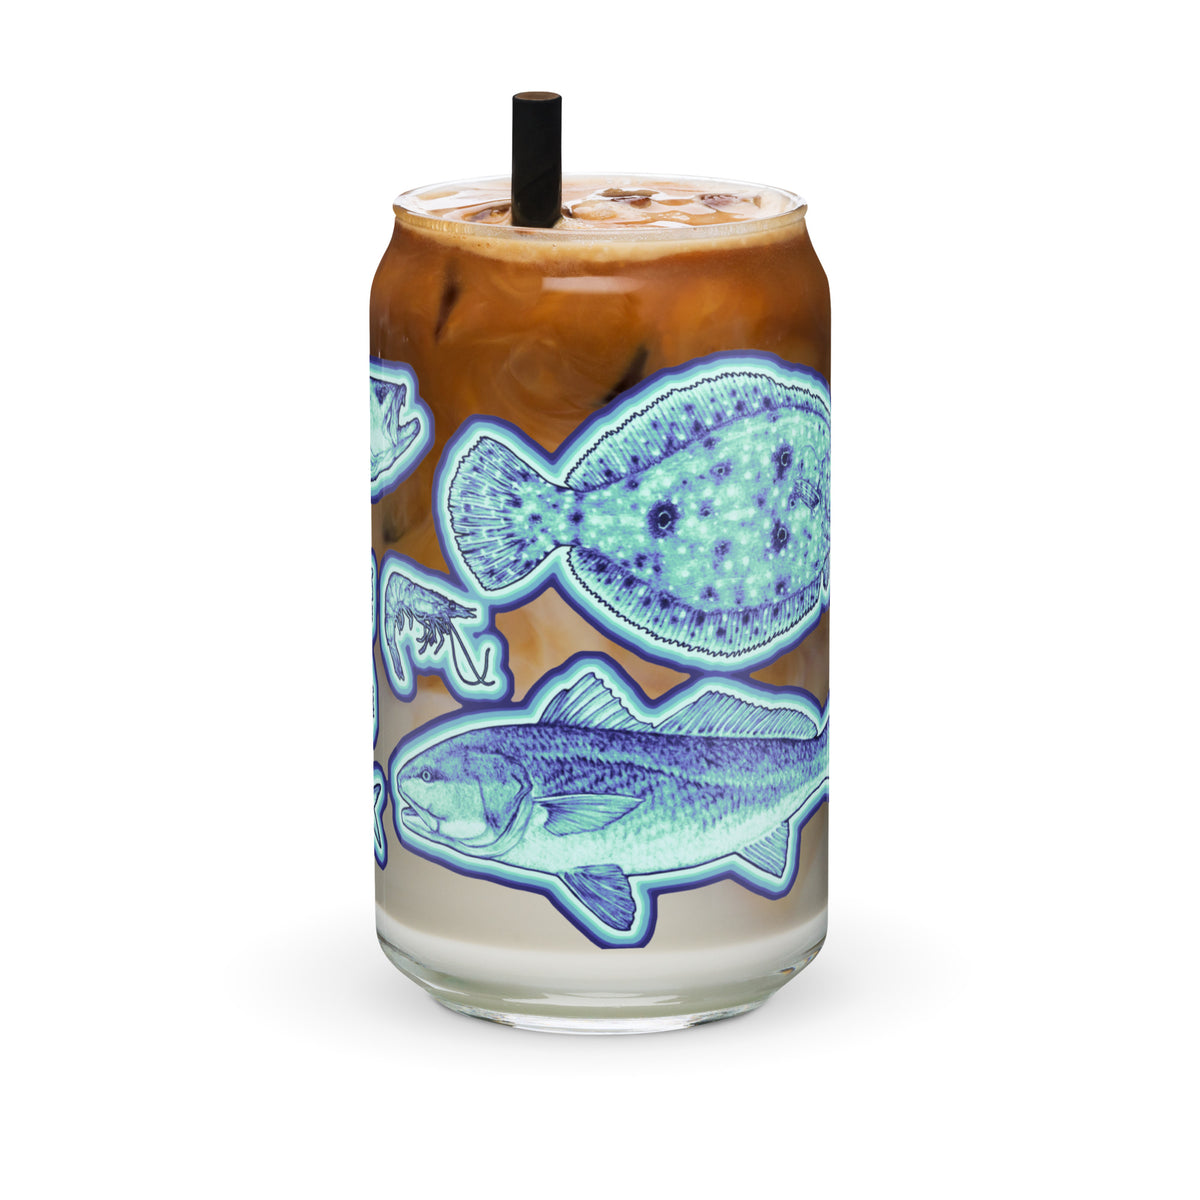 Inshore&#39;s Greatest Hits in &#39;Florida Teal&#39; Glassware - Shaker Pint Glass or Vintage Can-Shaped Glass